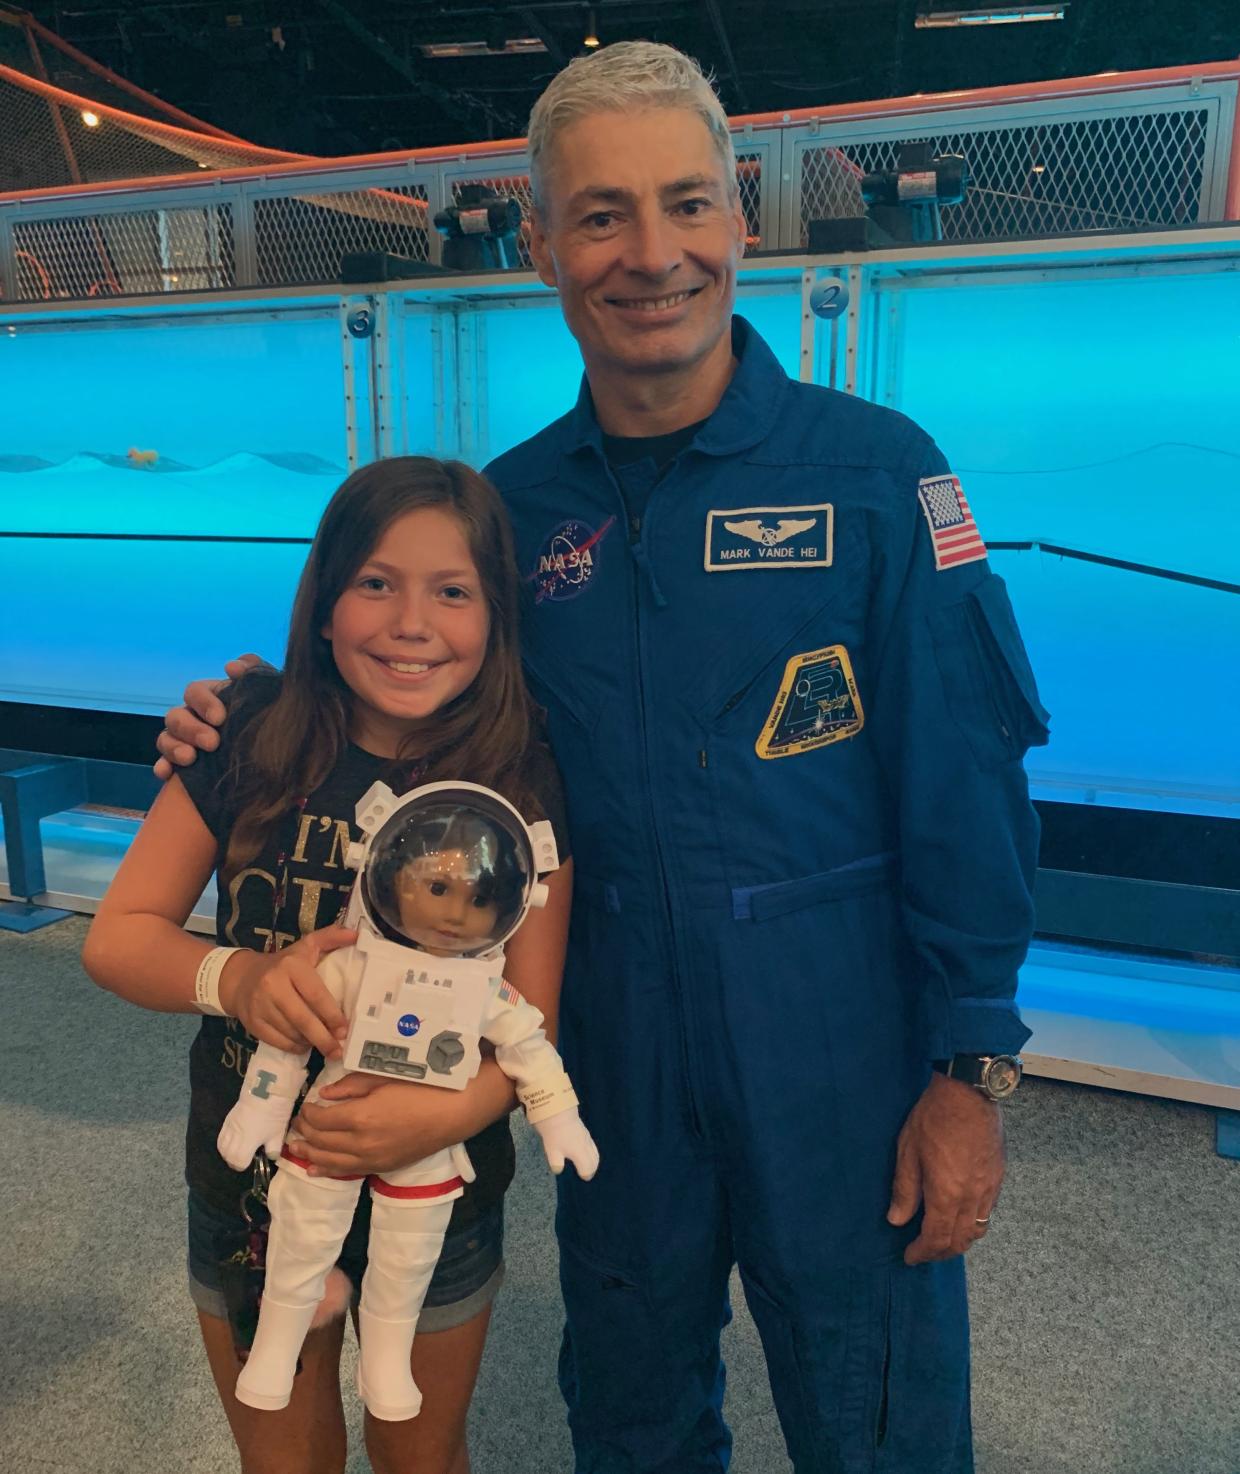 NASA Astronaut Mark Vande Hei at Science Museum of Minnesota 2019 Moon Landing anniversary event with girl holding American Girl Doll astronaut doll 